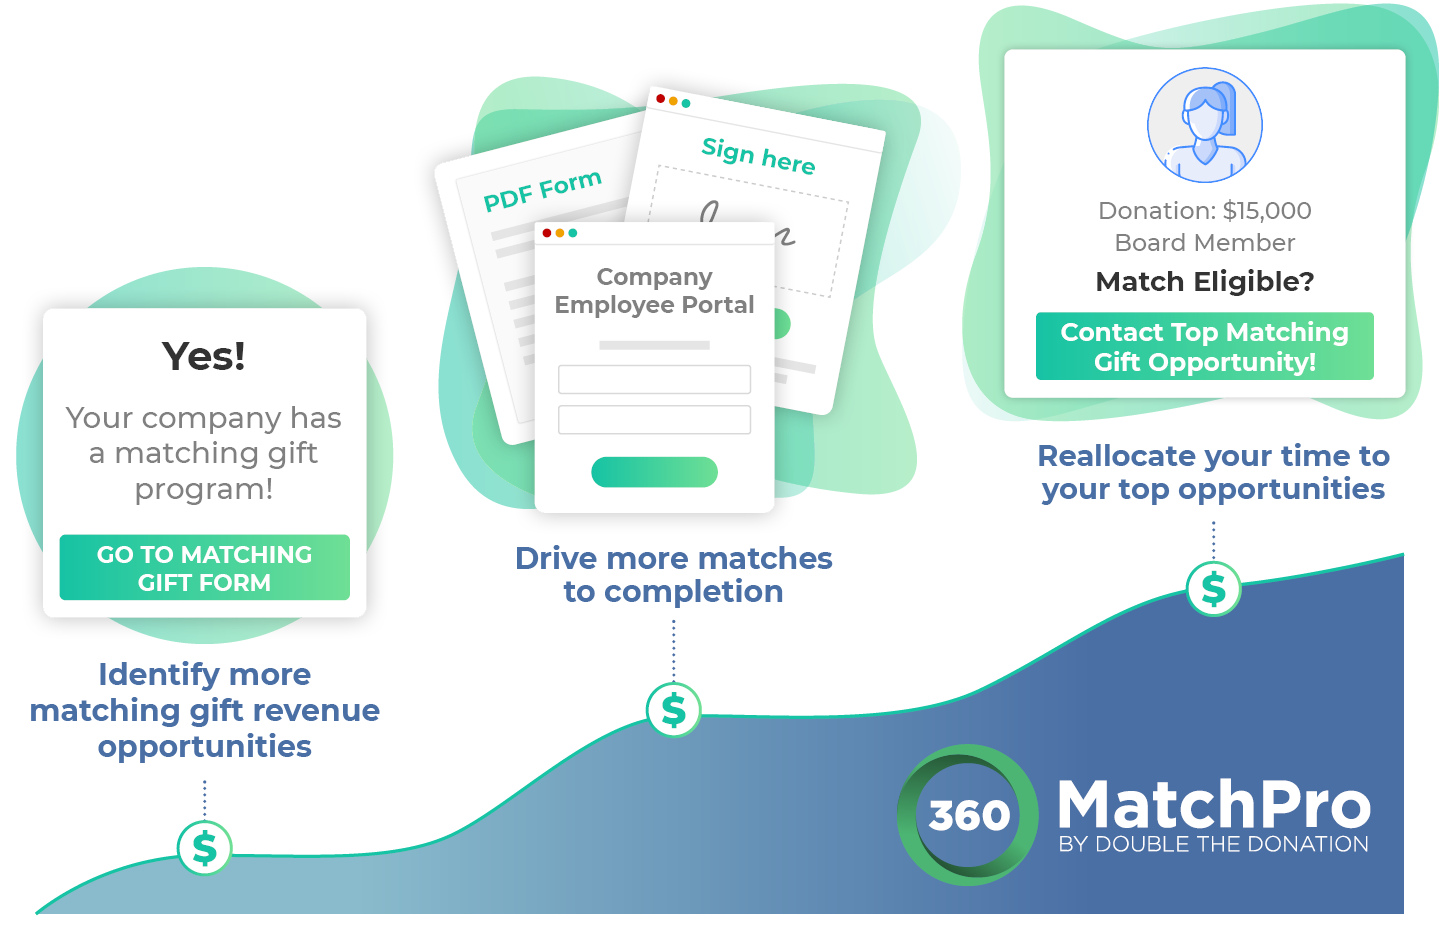 This image shows the valuable featuresn of 360MatchPro along an increasing line graph, which is meant to signify increasing donation revenue.